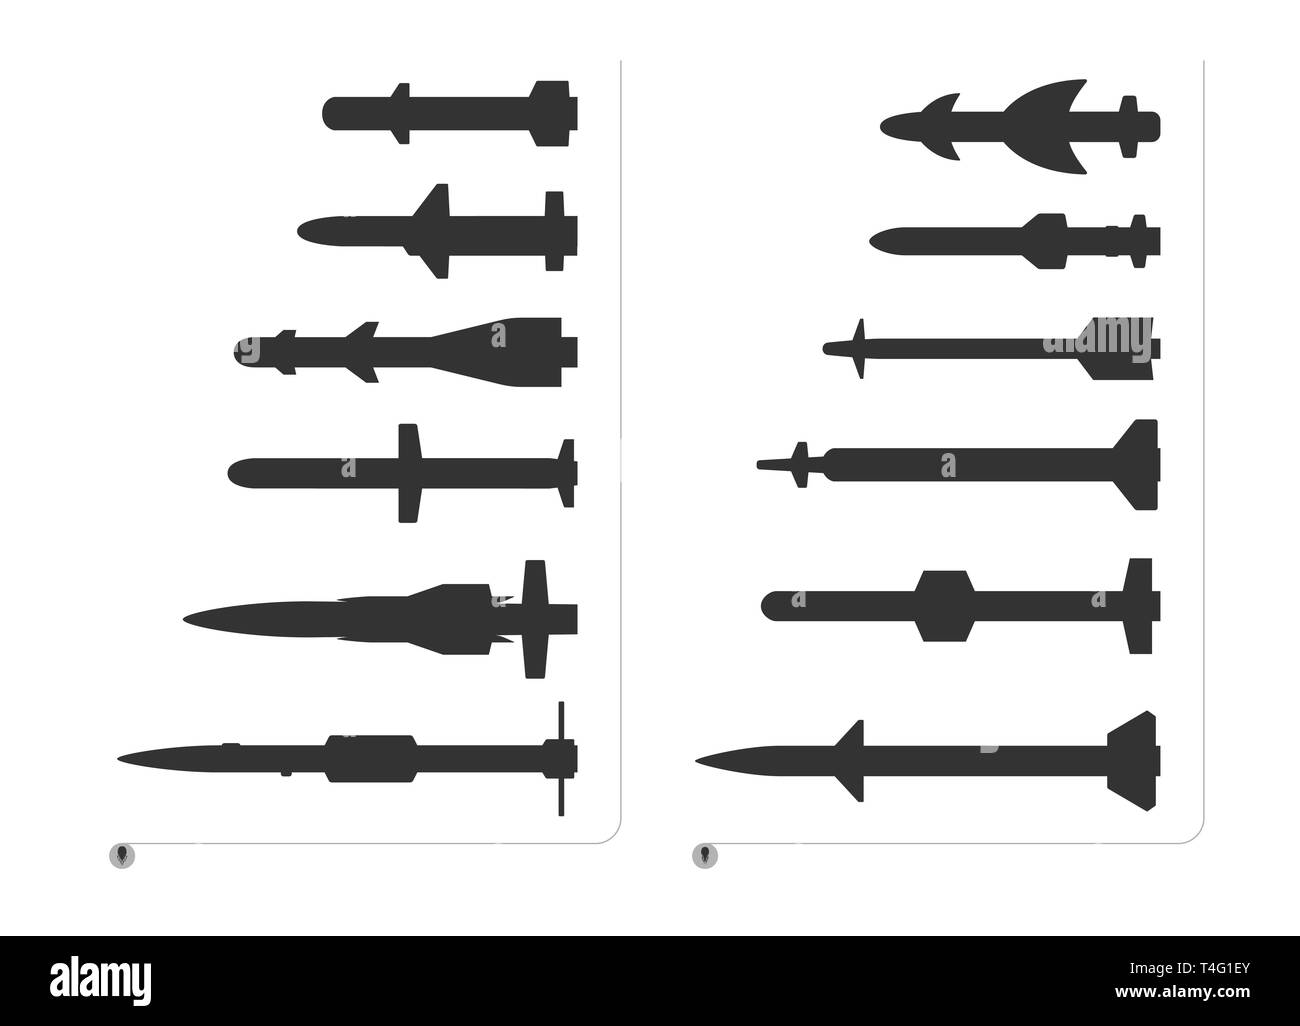 Set of silhouette missiles for fighter aircraft is isolated on a white background. The set of rockets have different forms and size. Stock Vector